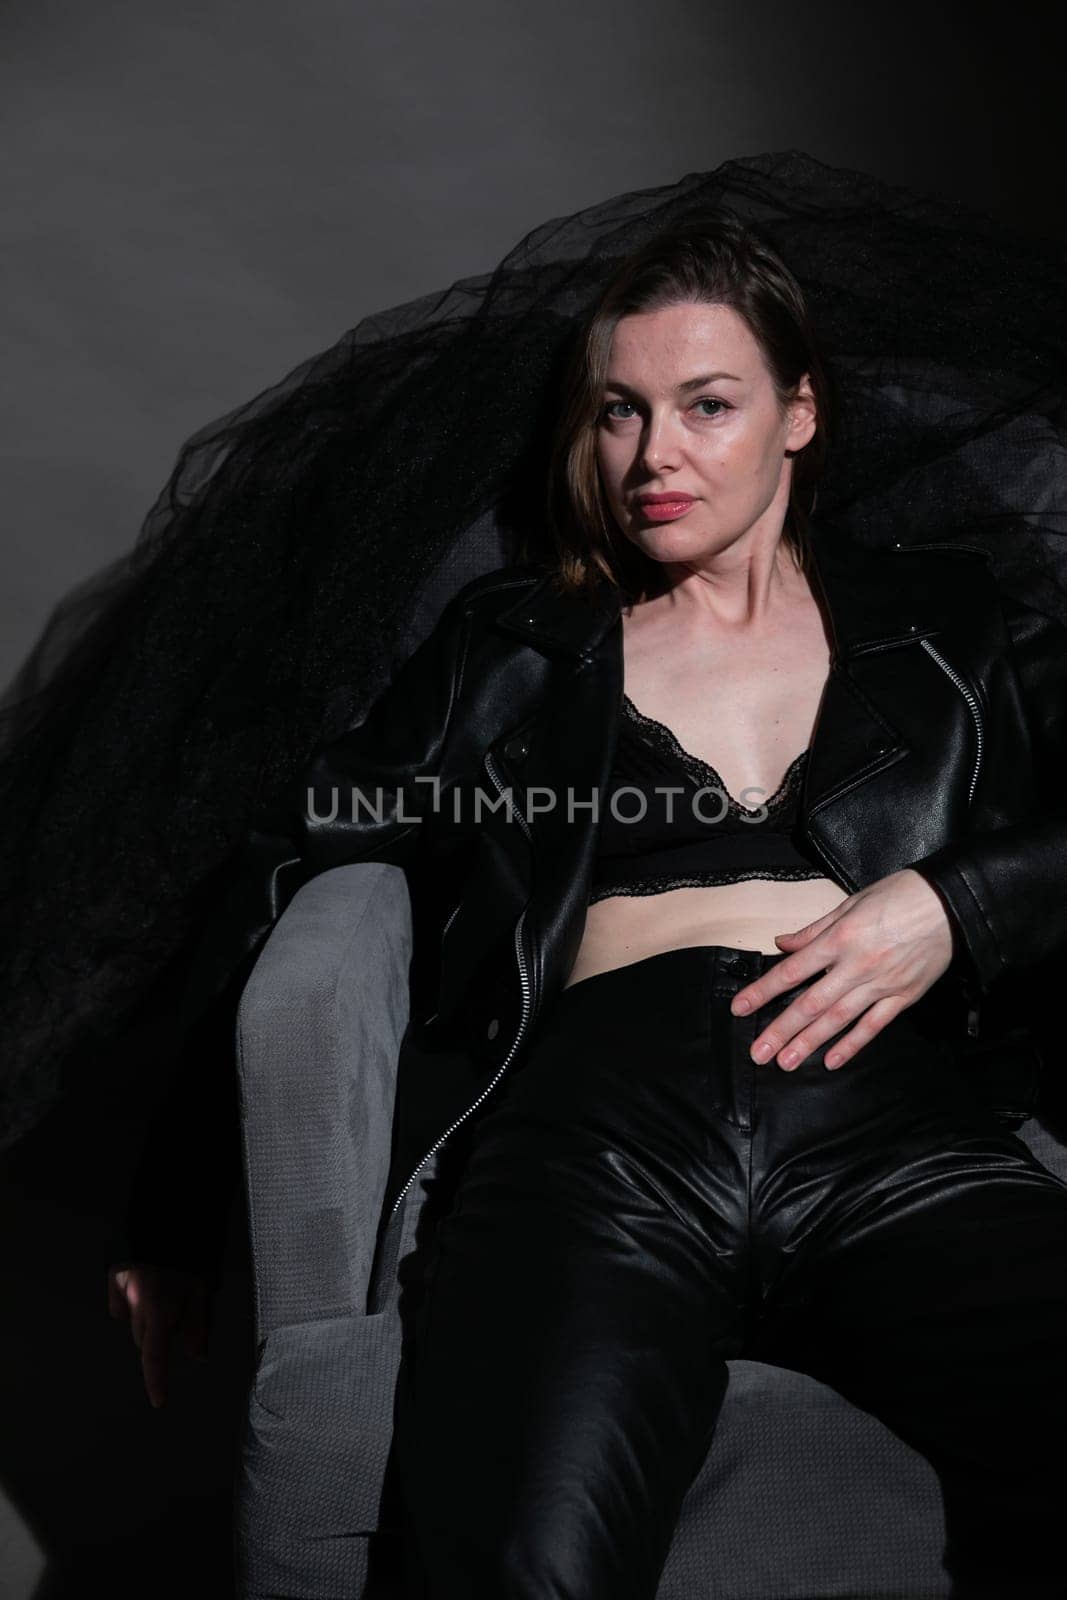 woman in dark clothes and a bra sits on a chair in a dark room